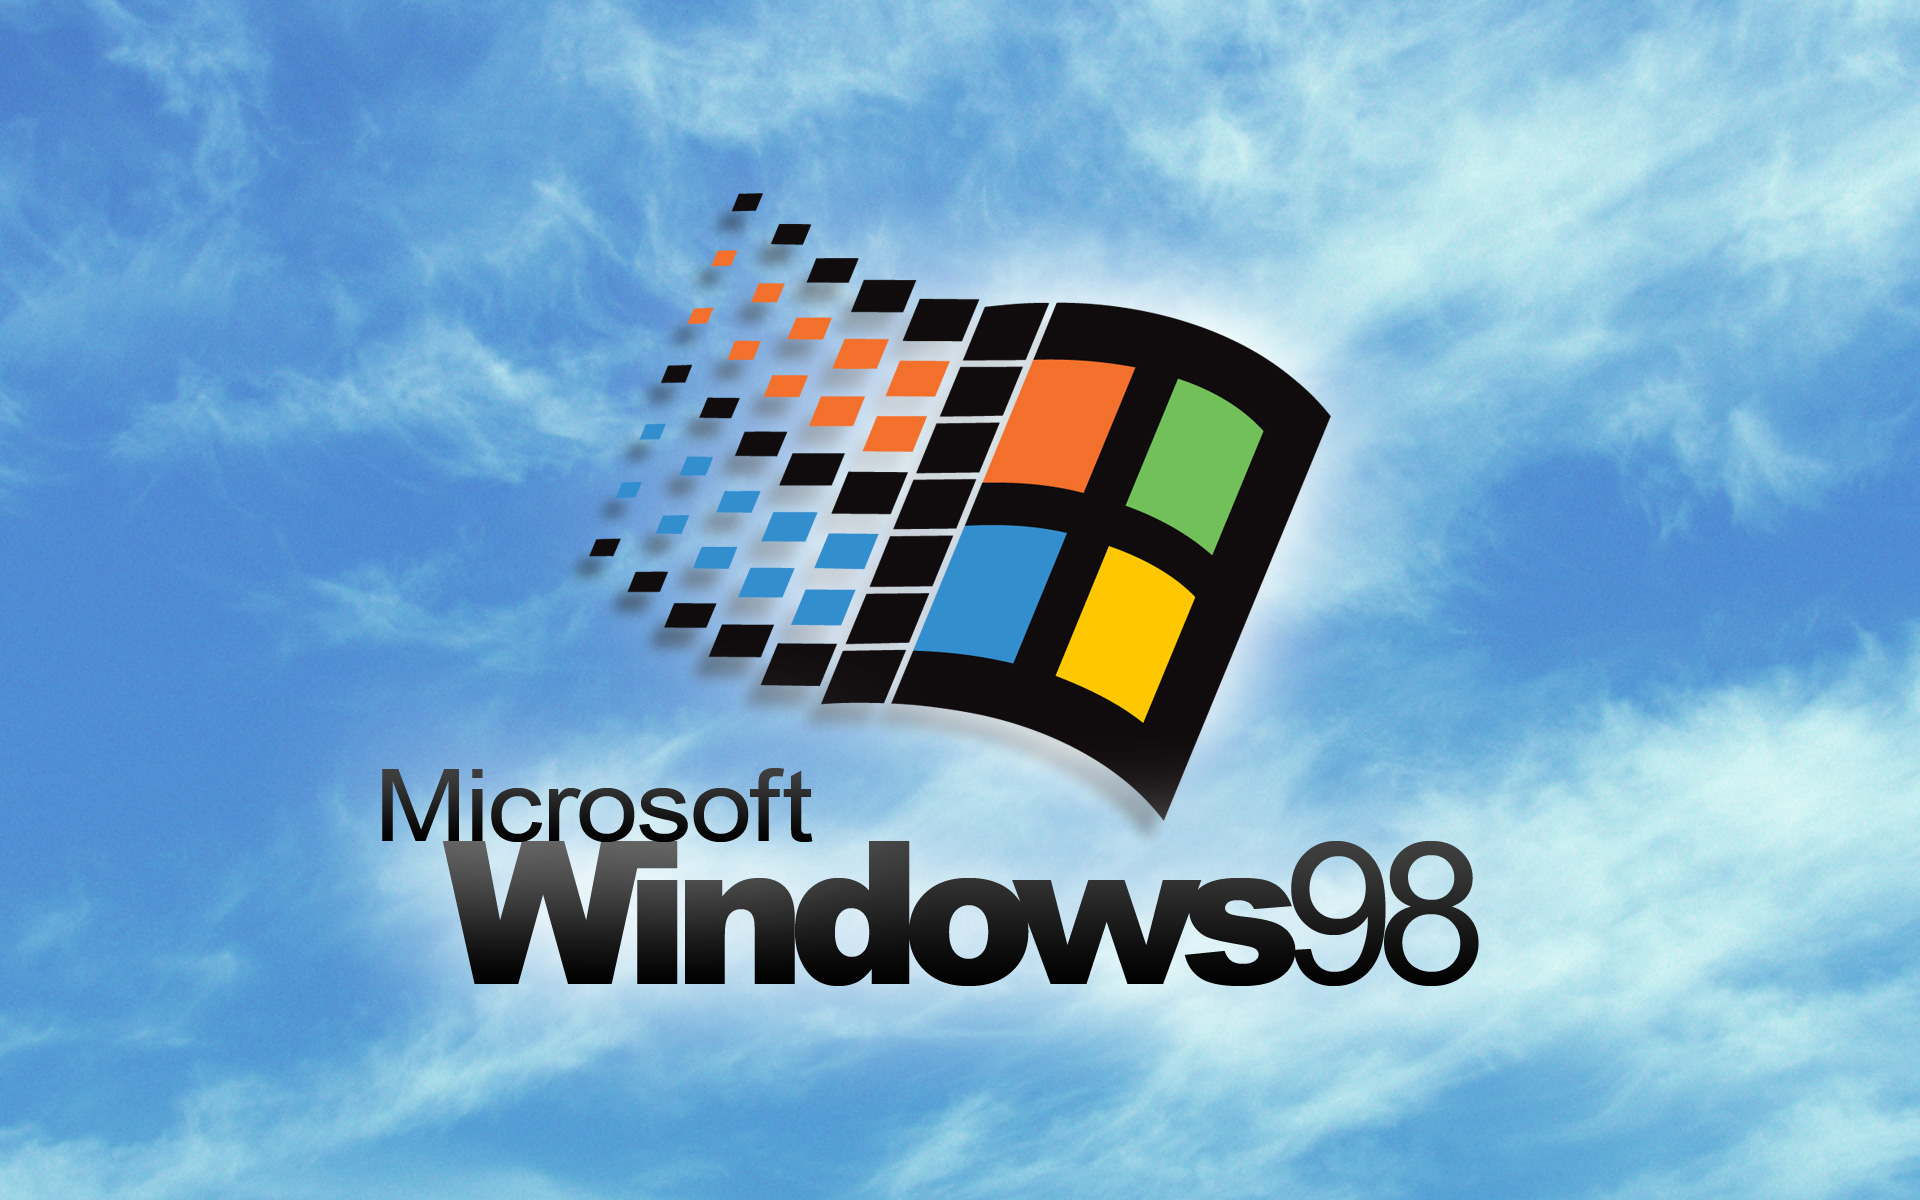 large_windows_98_wallpaper_by_jlsgraphics-d41y8cx.jpg